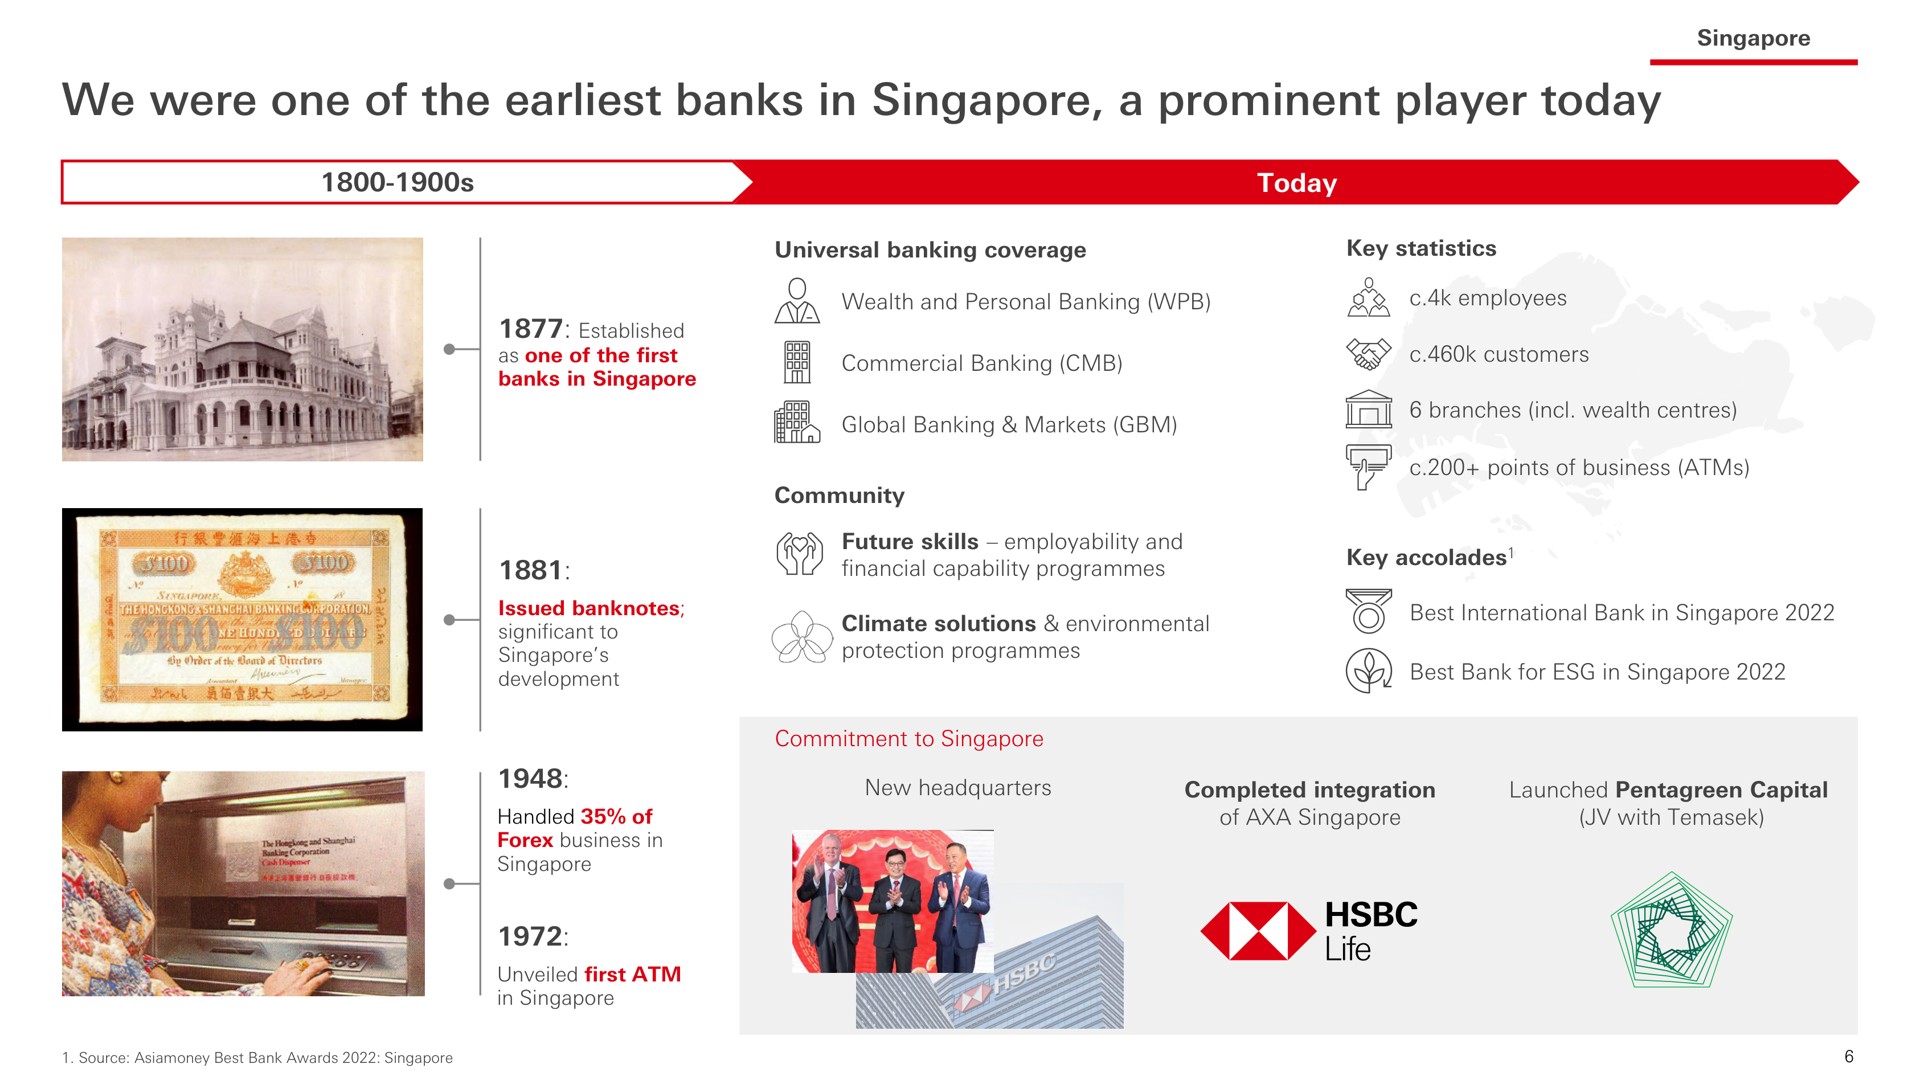 we were one of the banks in a prominent player today tie | HSBC